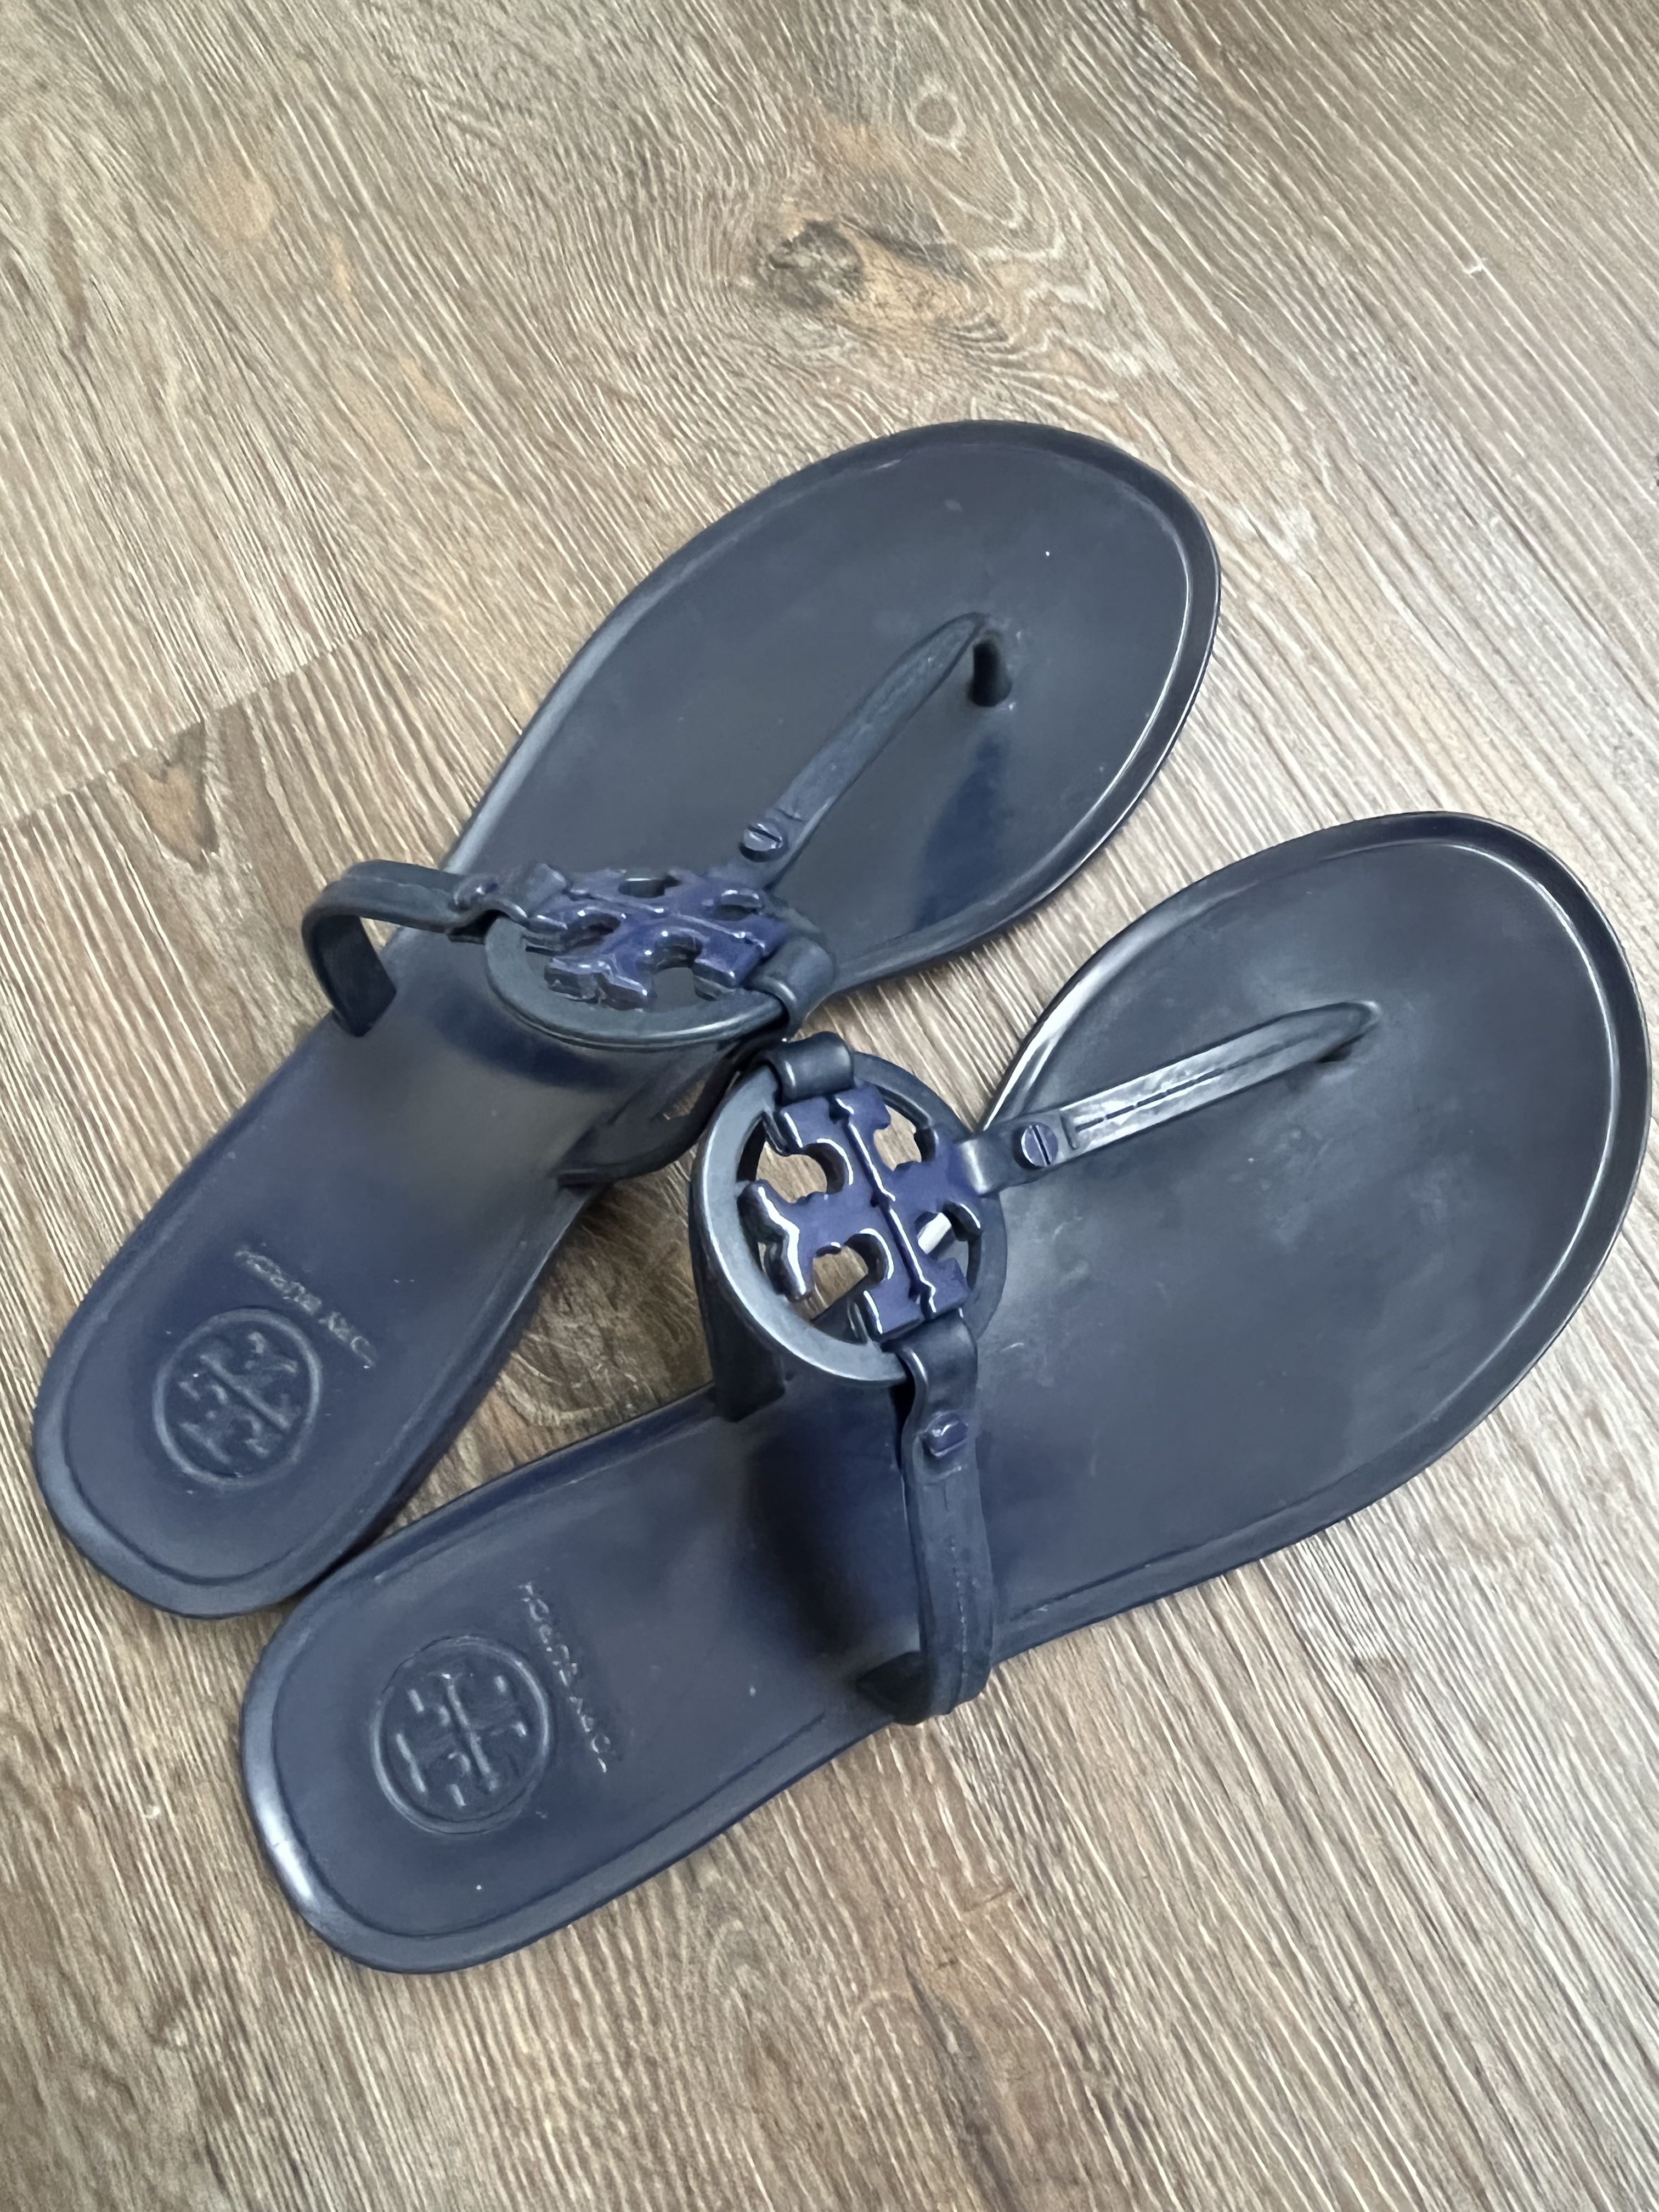 New in Box Tory Burch Mini Miller Jelly Thong Sandals Gray US 7 AUTHENTIC |  eBay